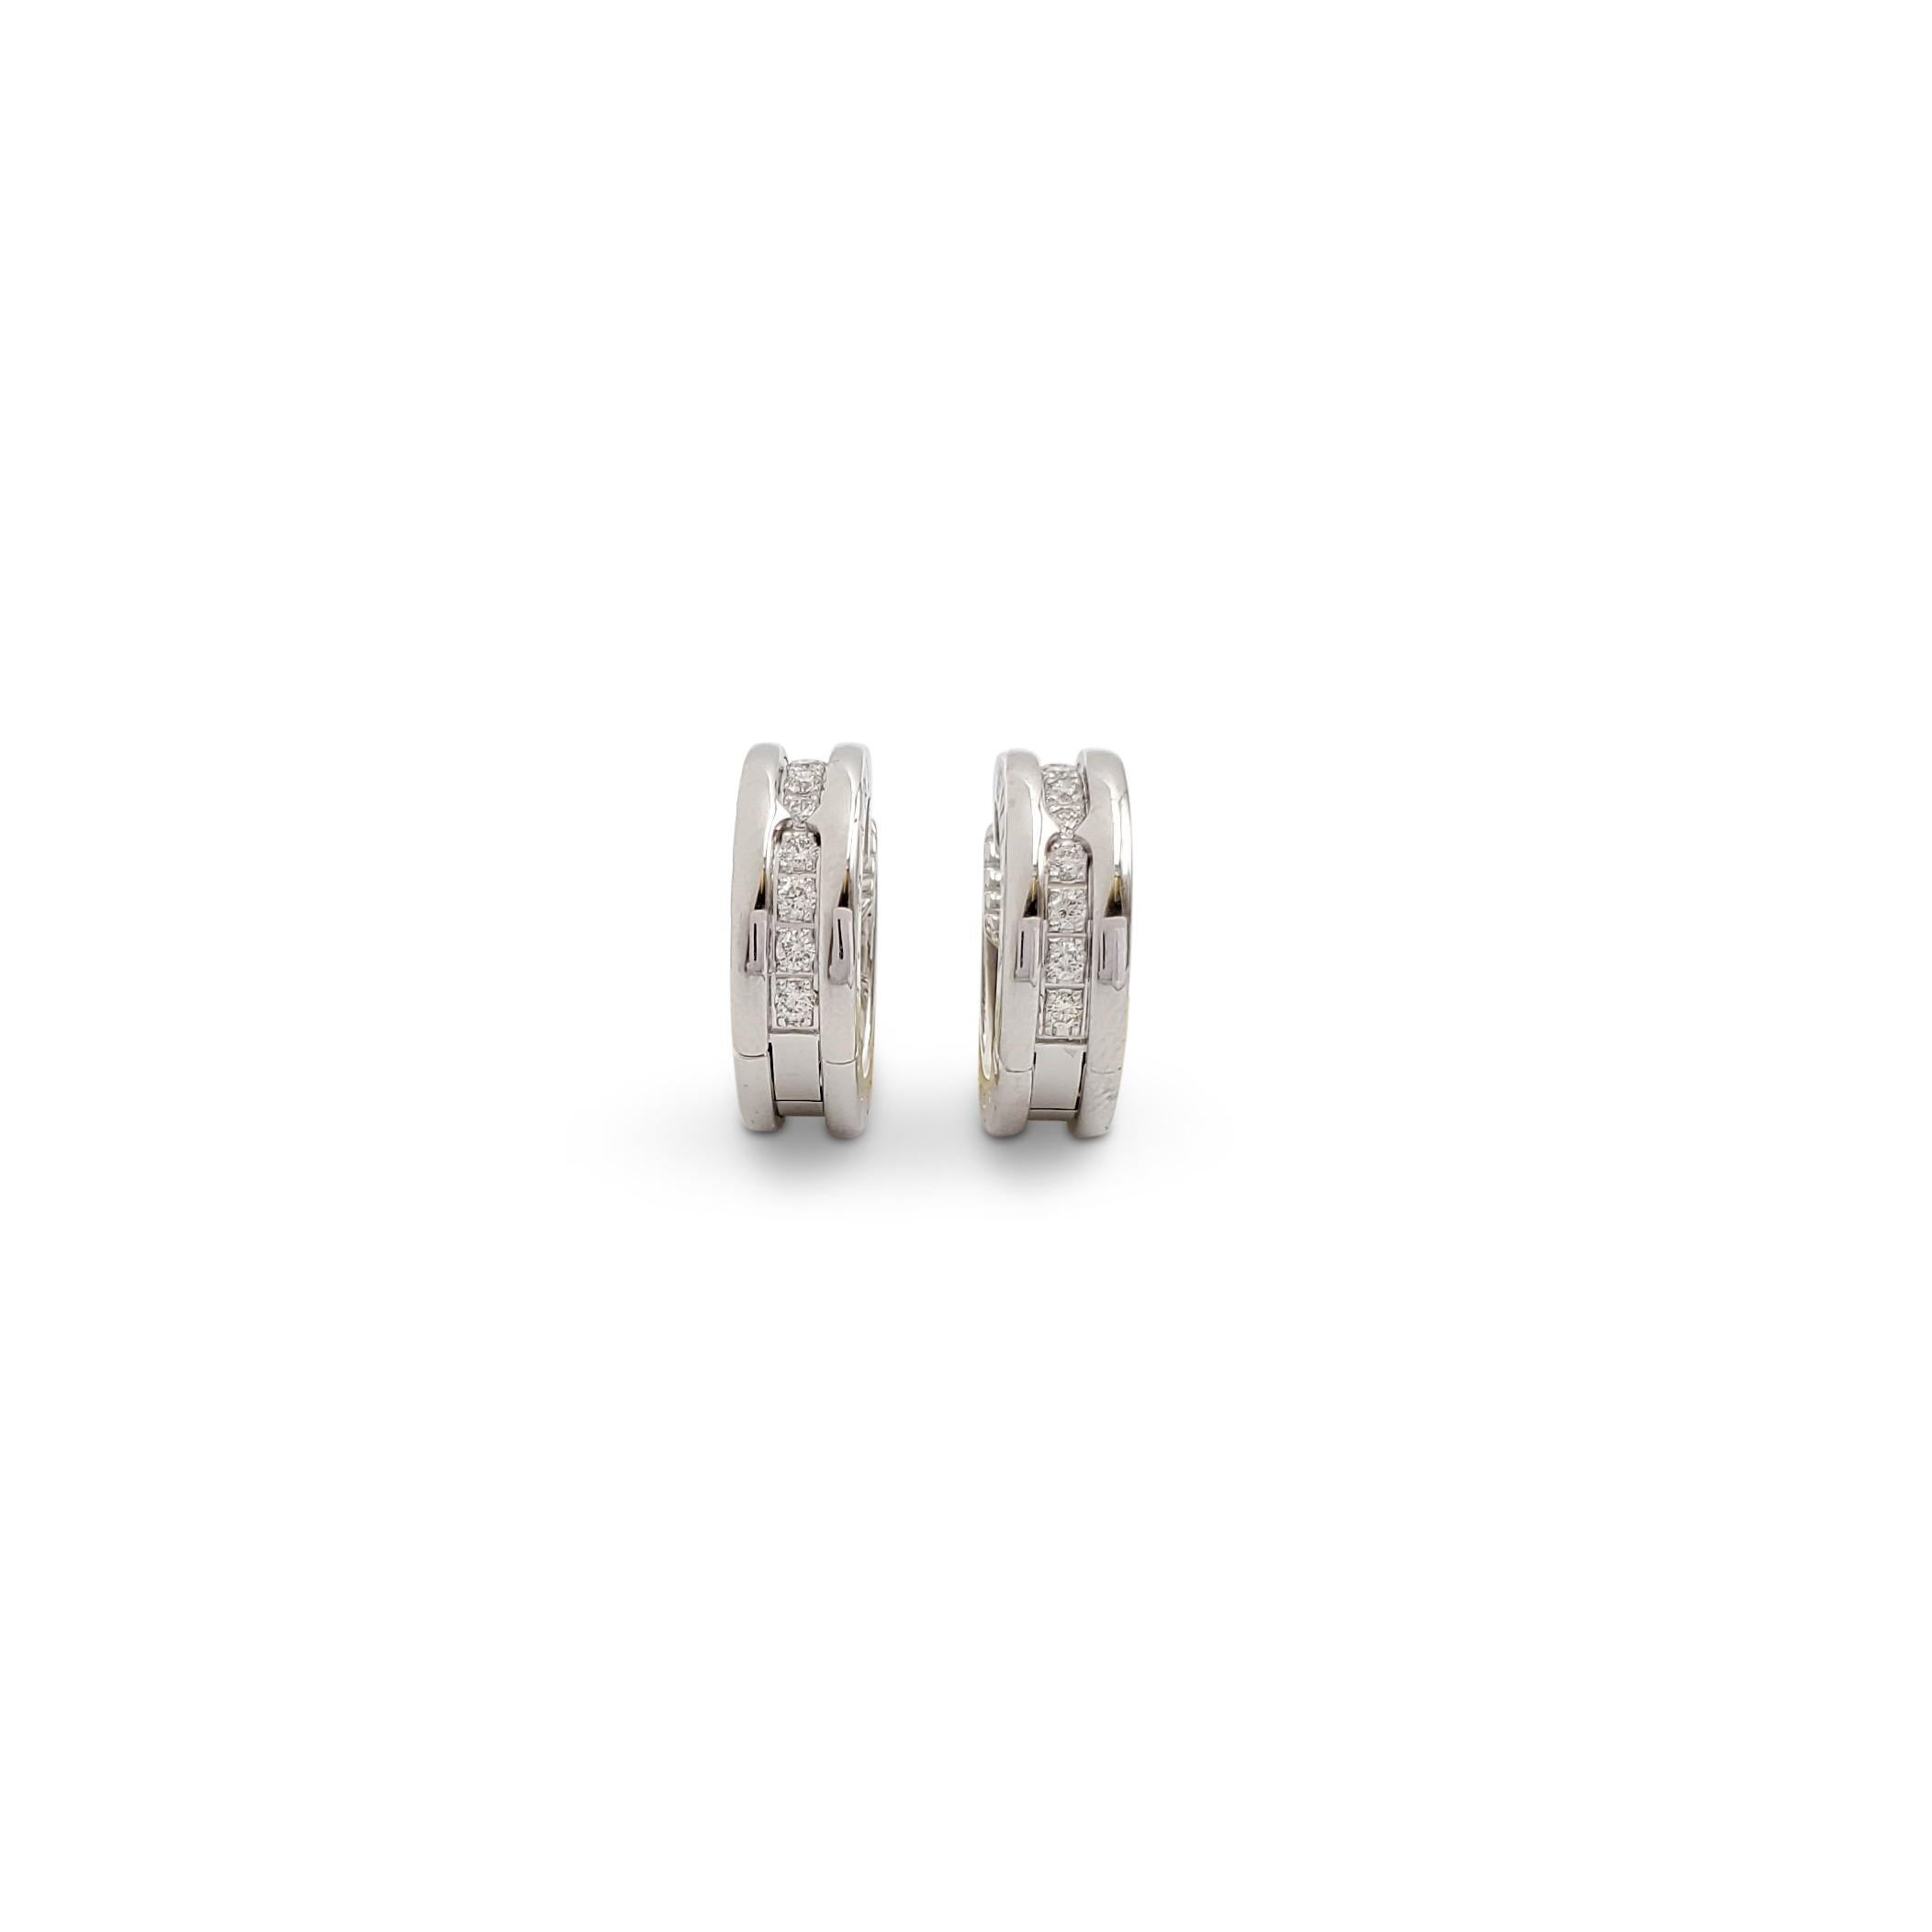 Authentic Bvlgari small hoop earrings from the 'B.zero1' collection crafted in 18 karat white gold and set with an estimated 0.16 carats of round brilliant cut diamonds (E-F, VS). Signed Bvlgari, 750, Made in Italy, with serial number. The earrings